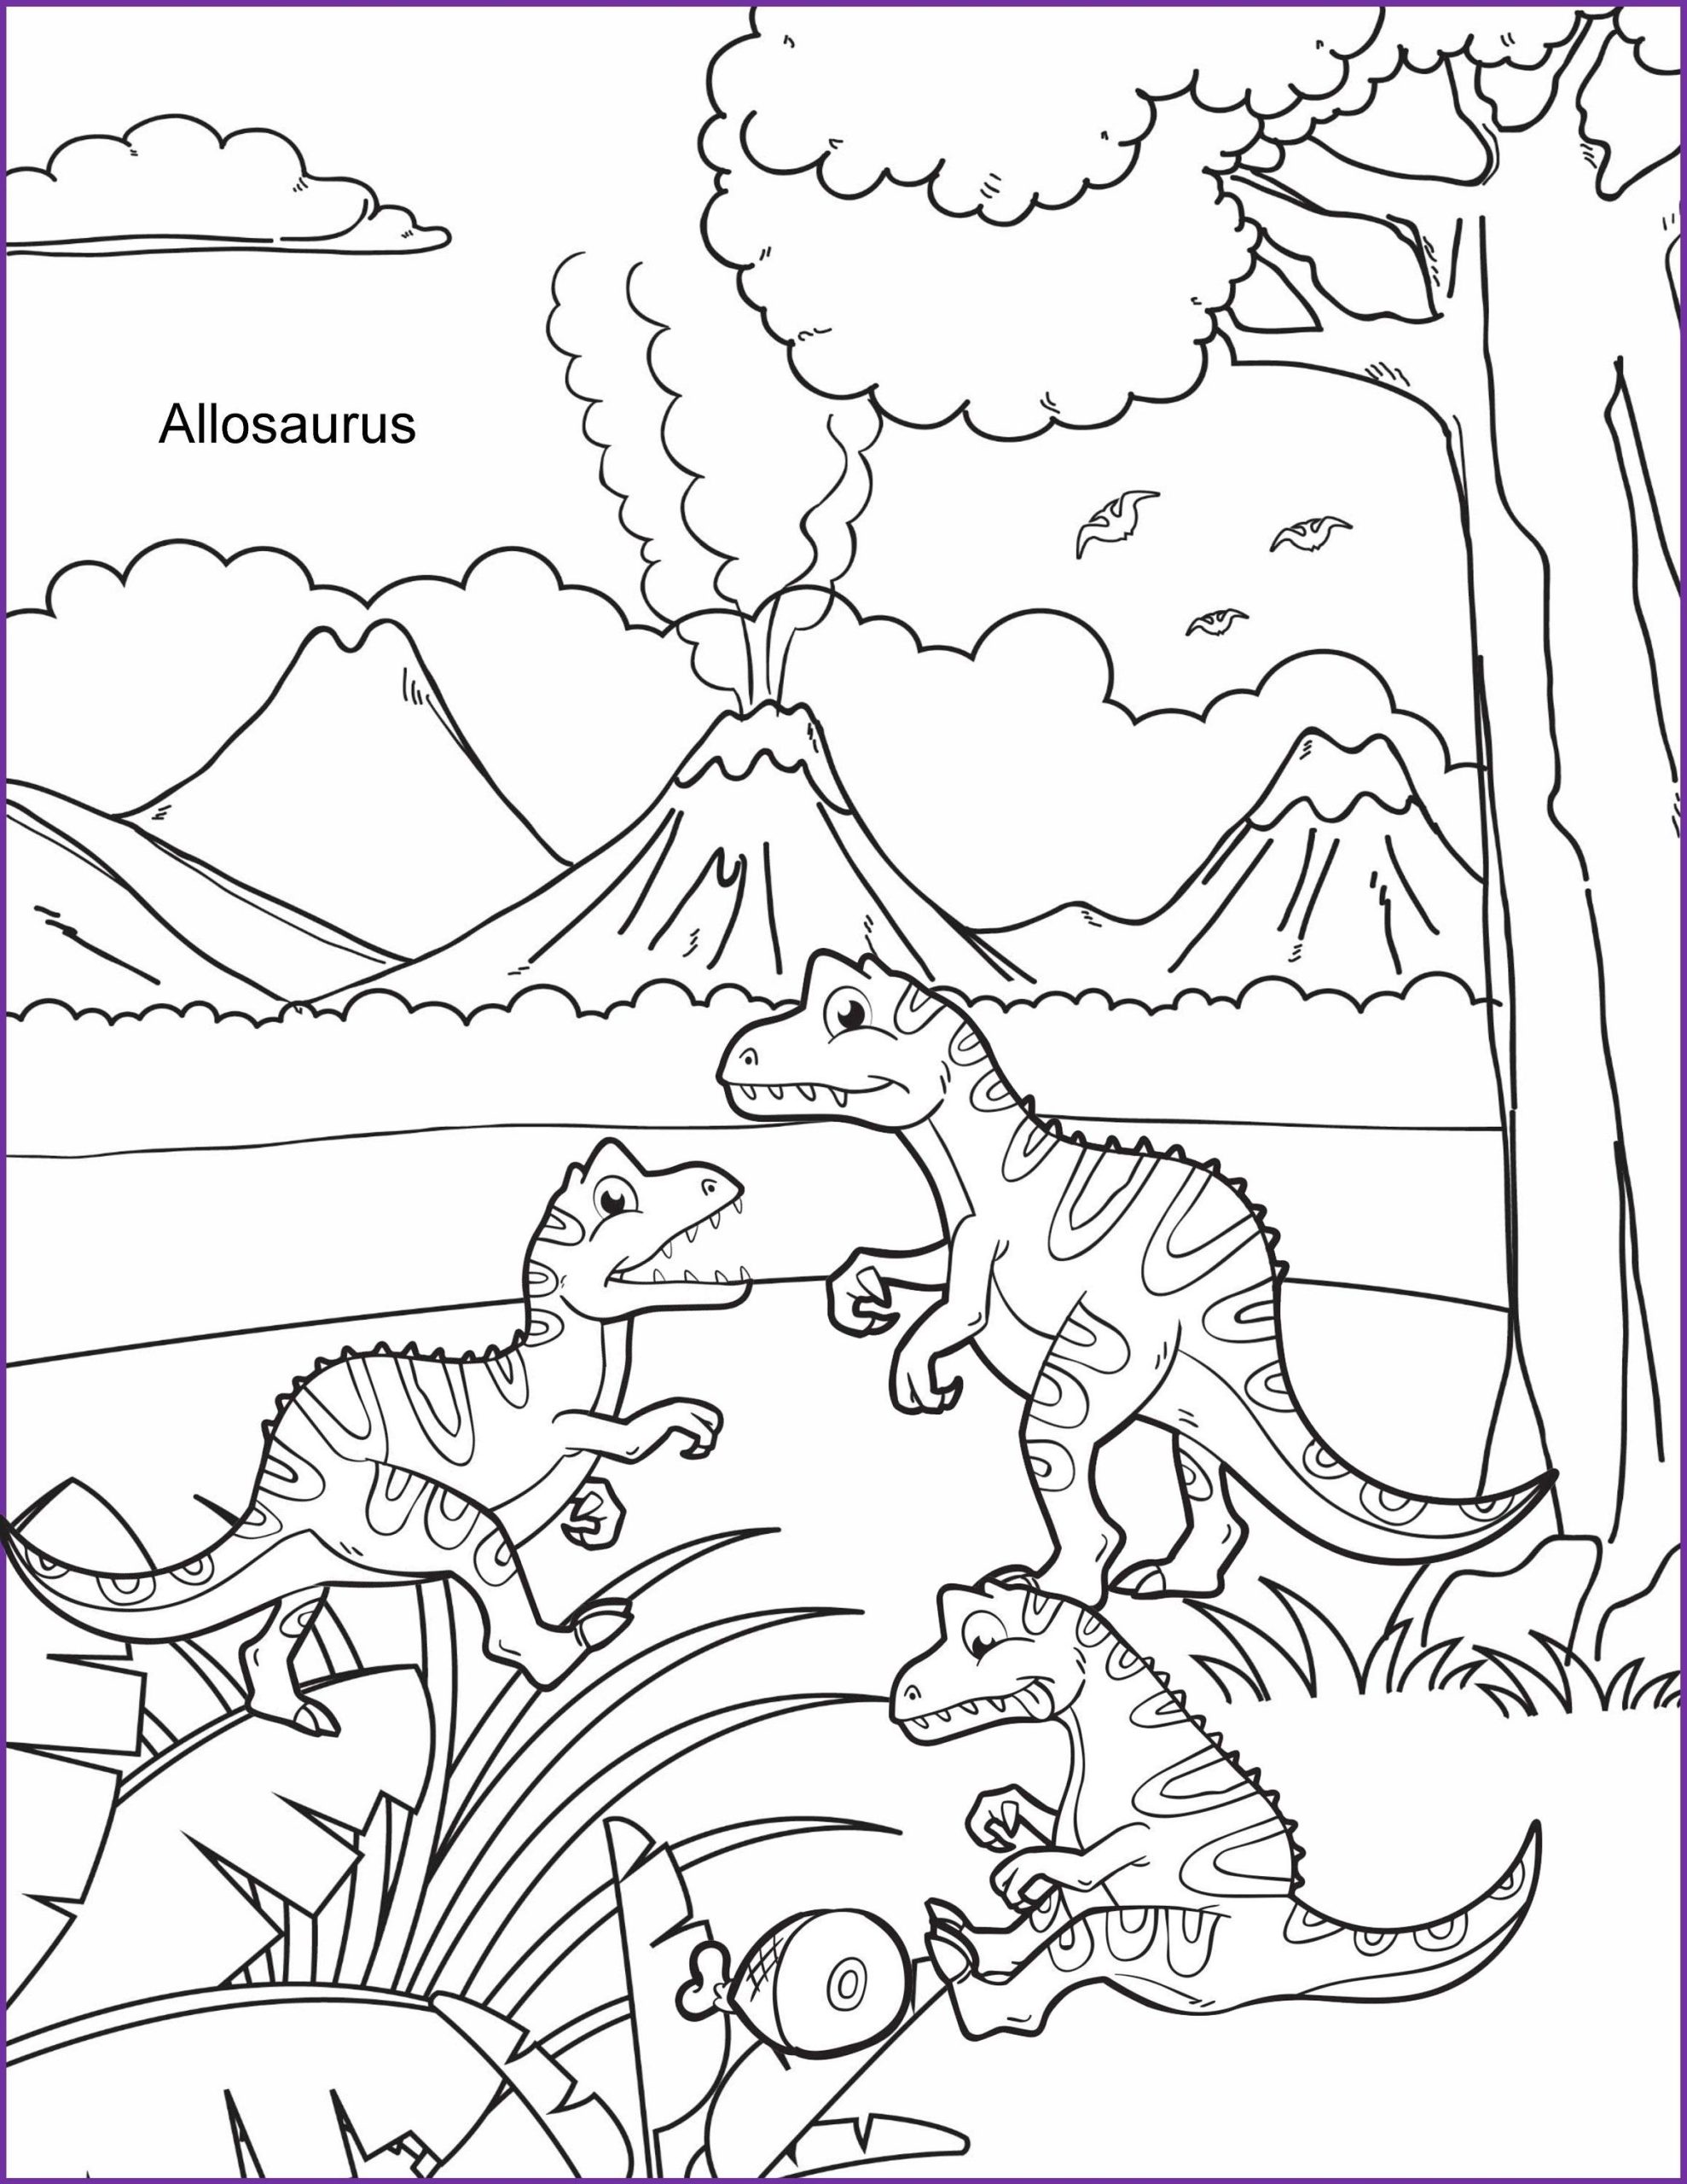 Coloring Pages for Kids, 5 Printable Dinosaur Colouring Sheets with Jurassic Backgrounds - INSTANT DIGITAL DOWNLOAD